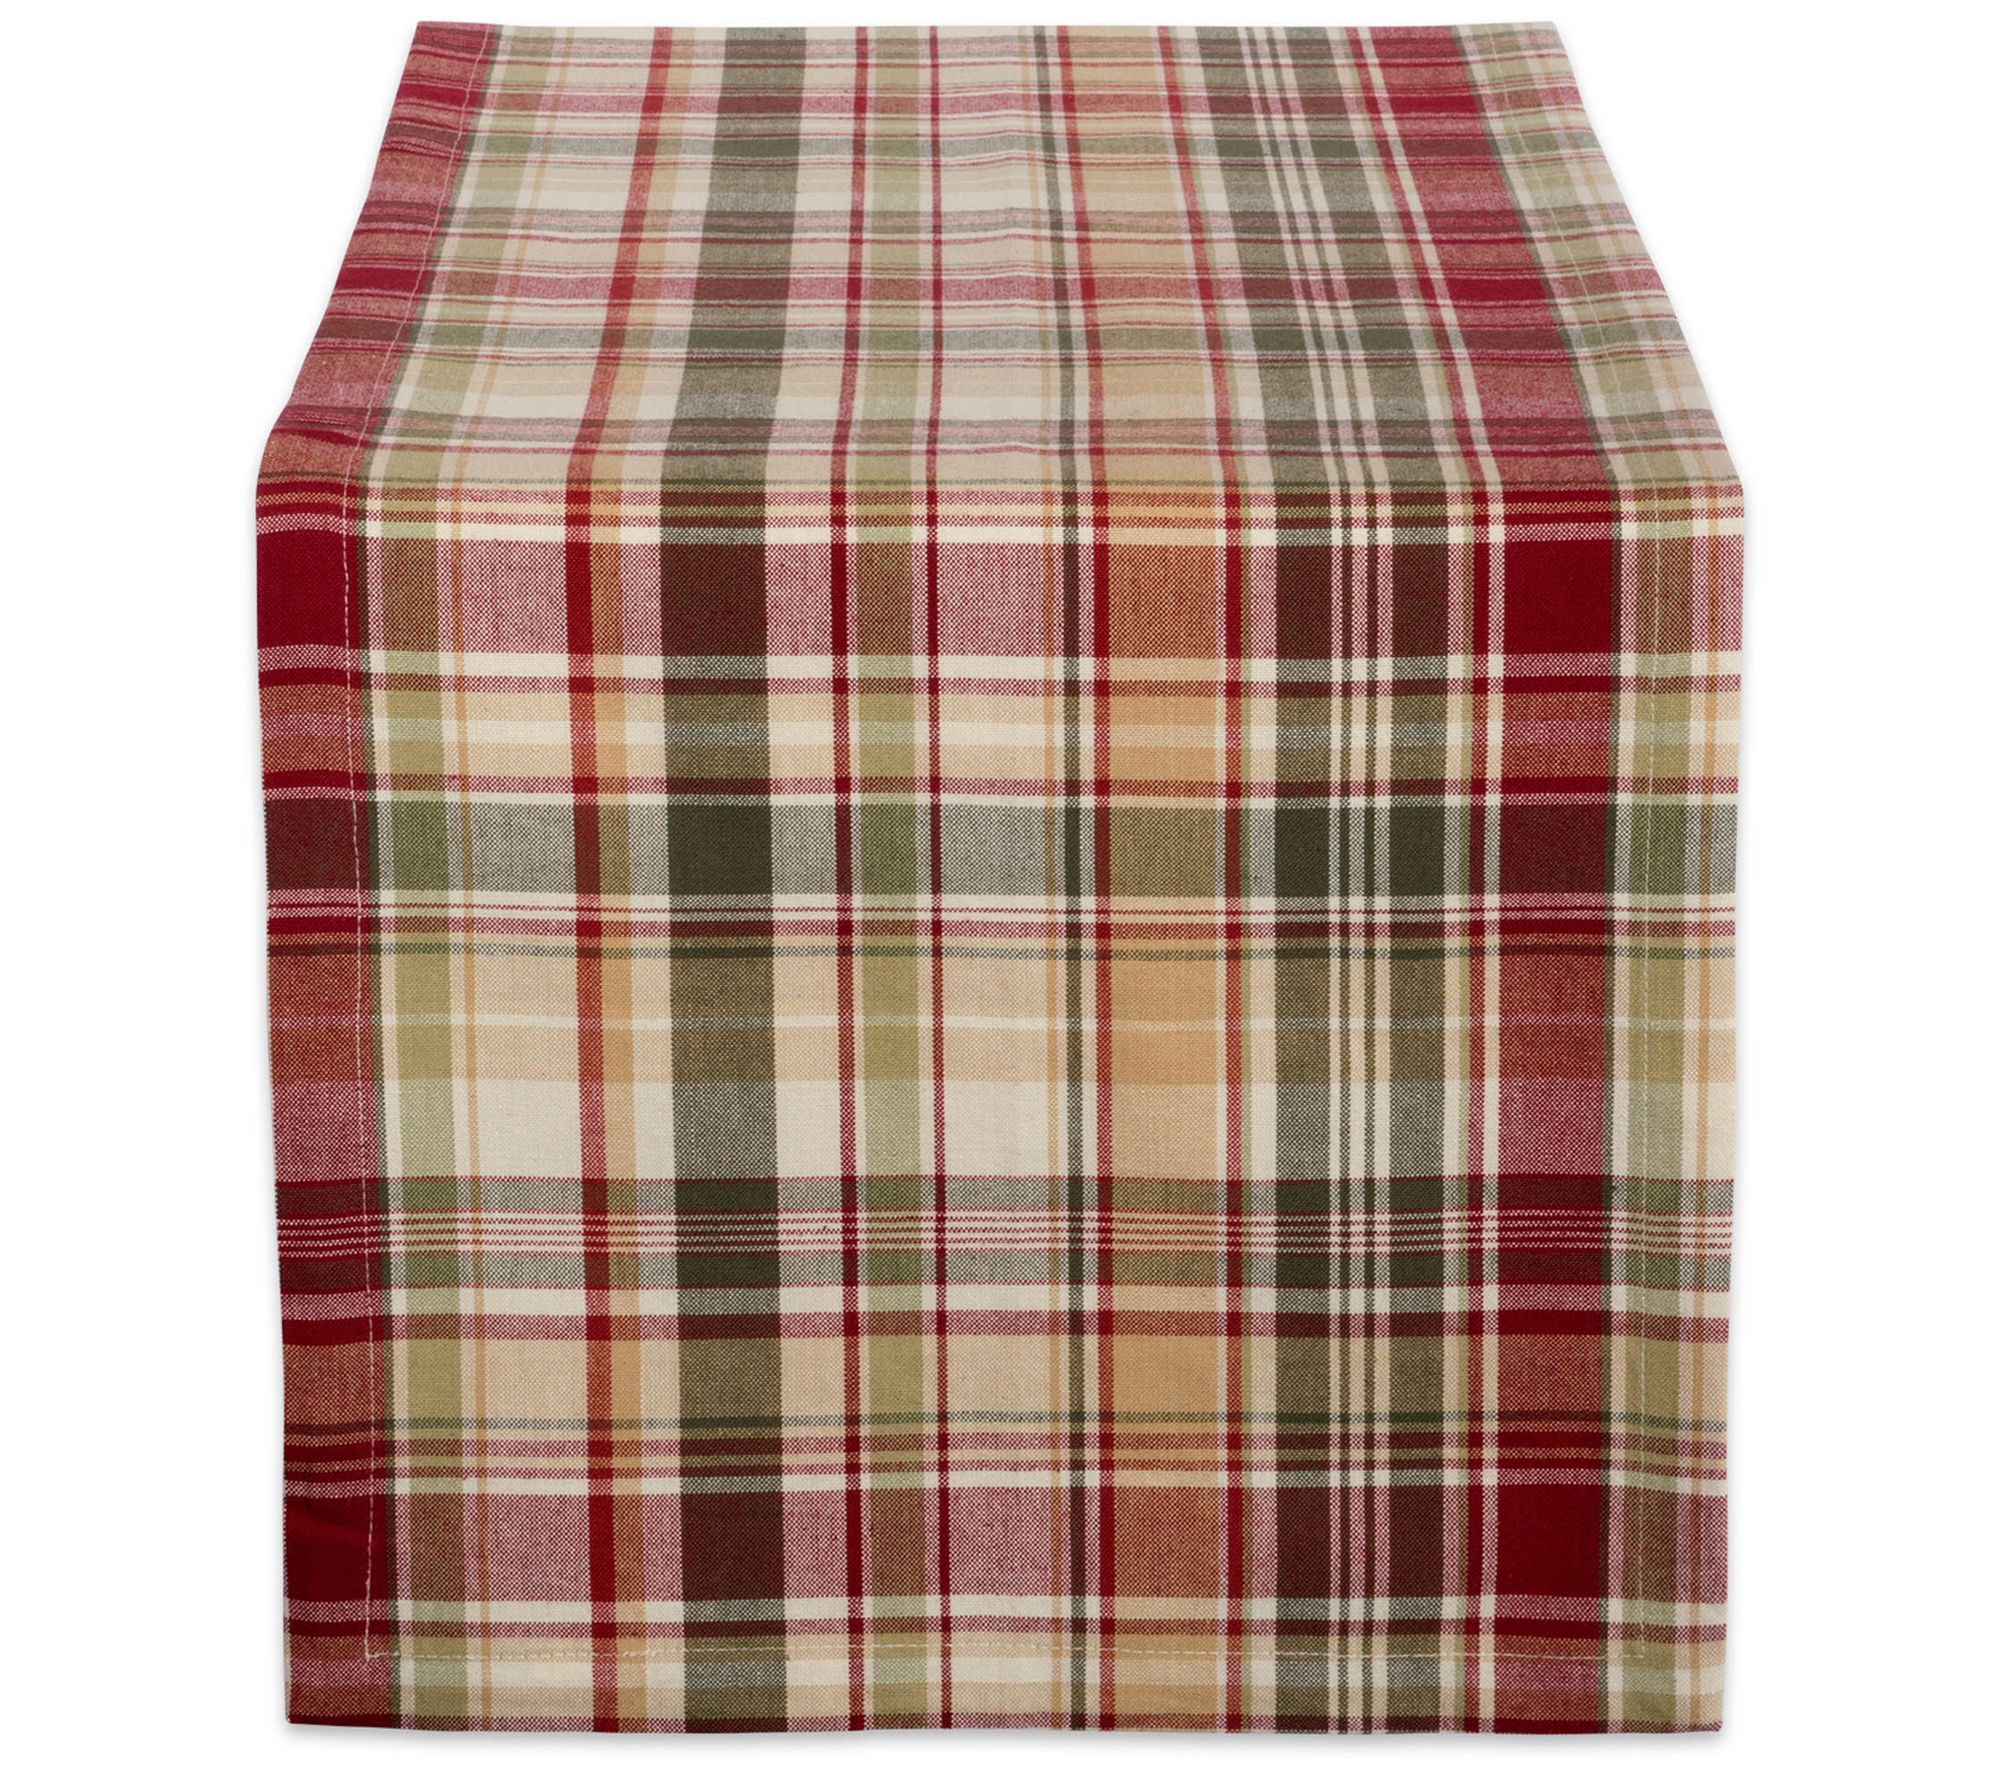 Design Imports Give Thanks Plaid Table Runner 14